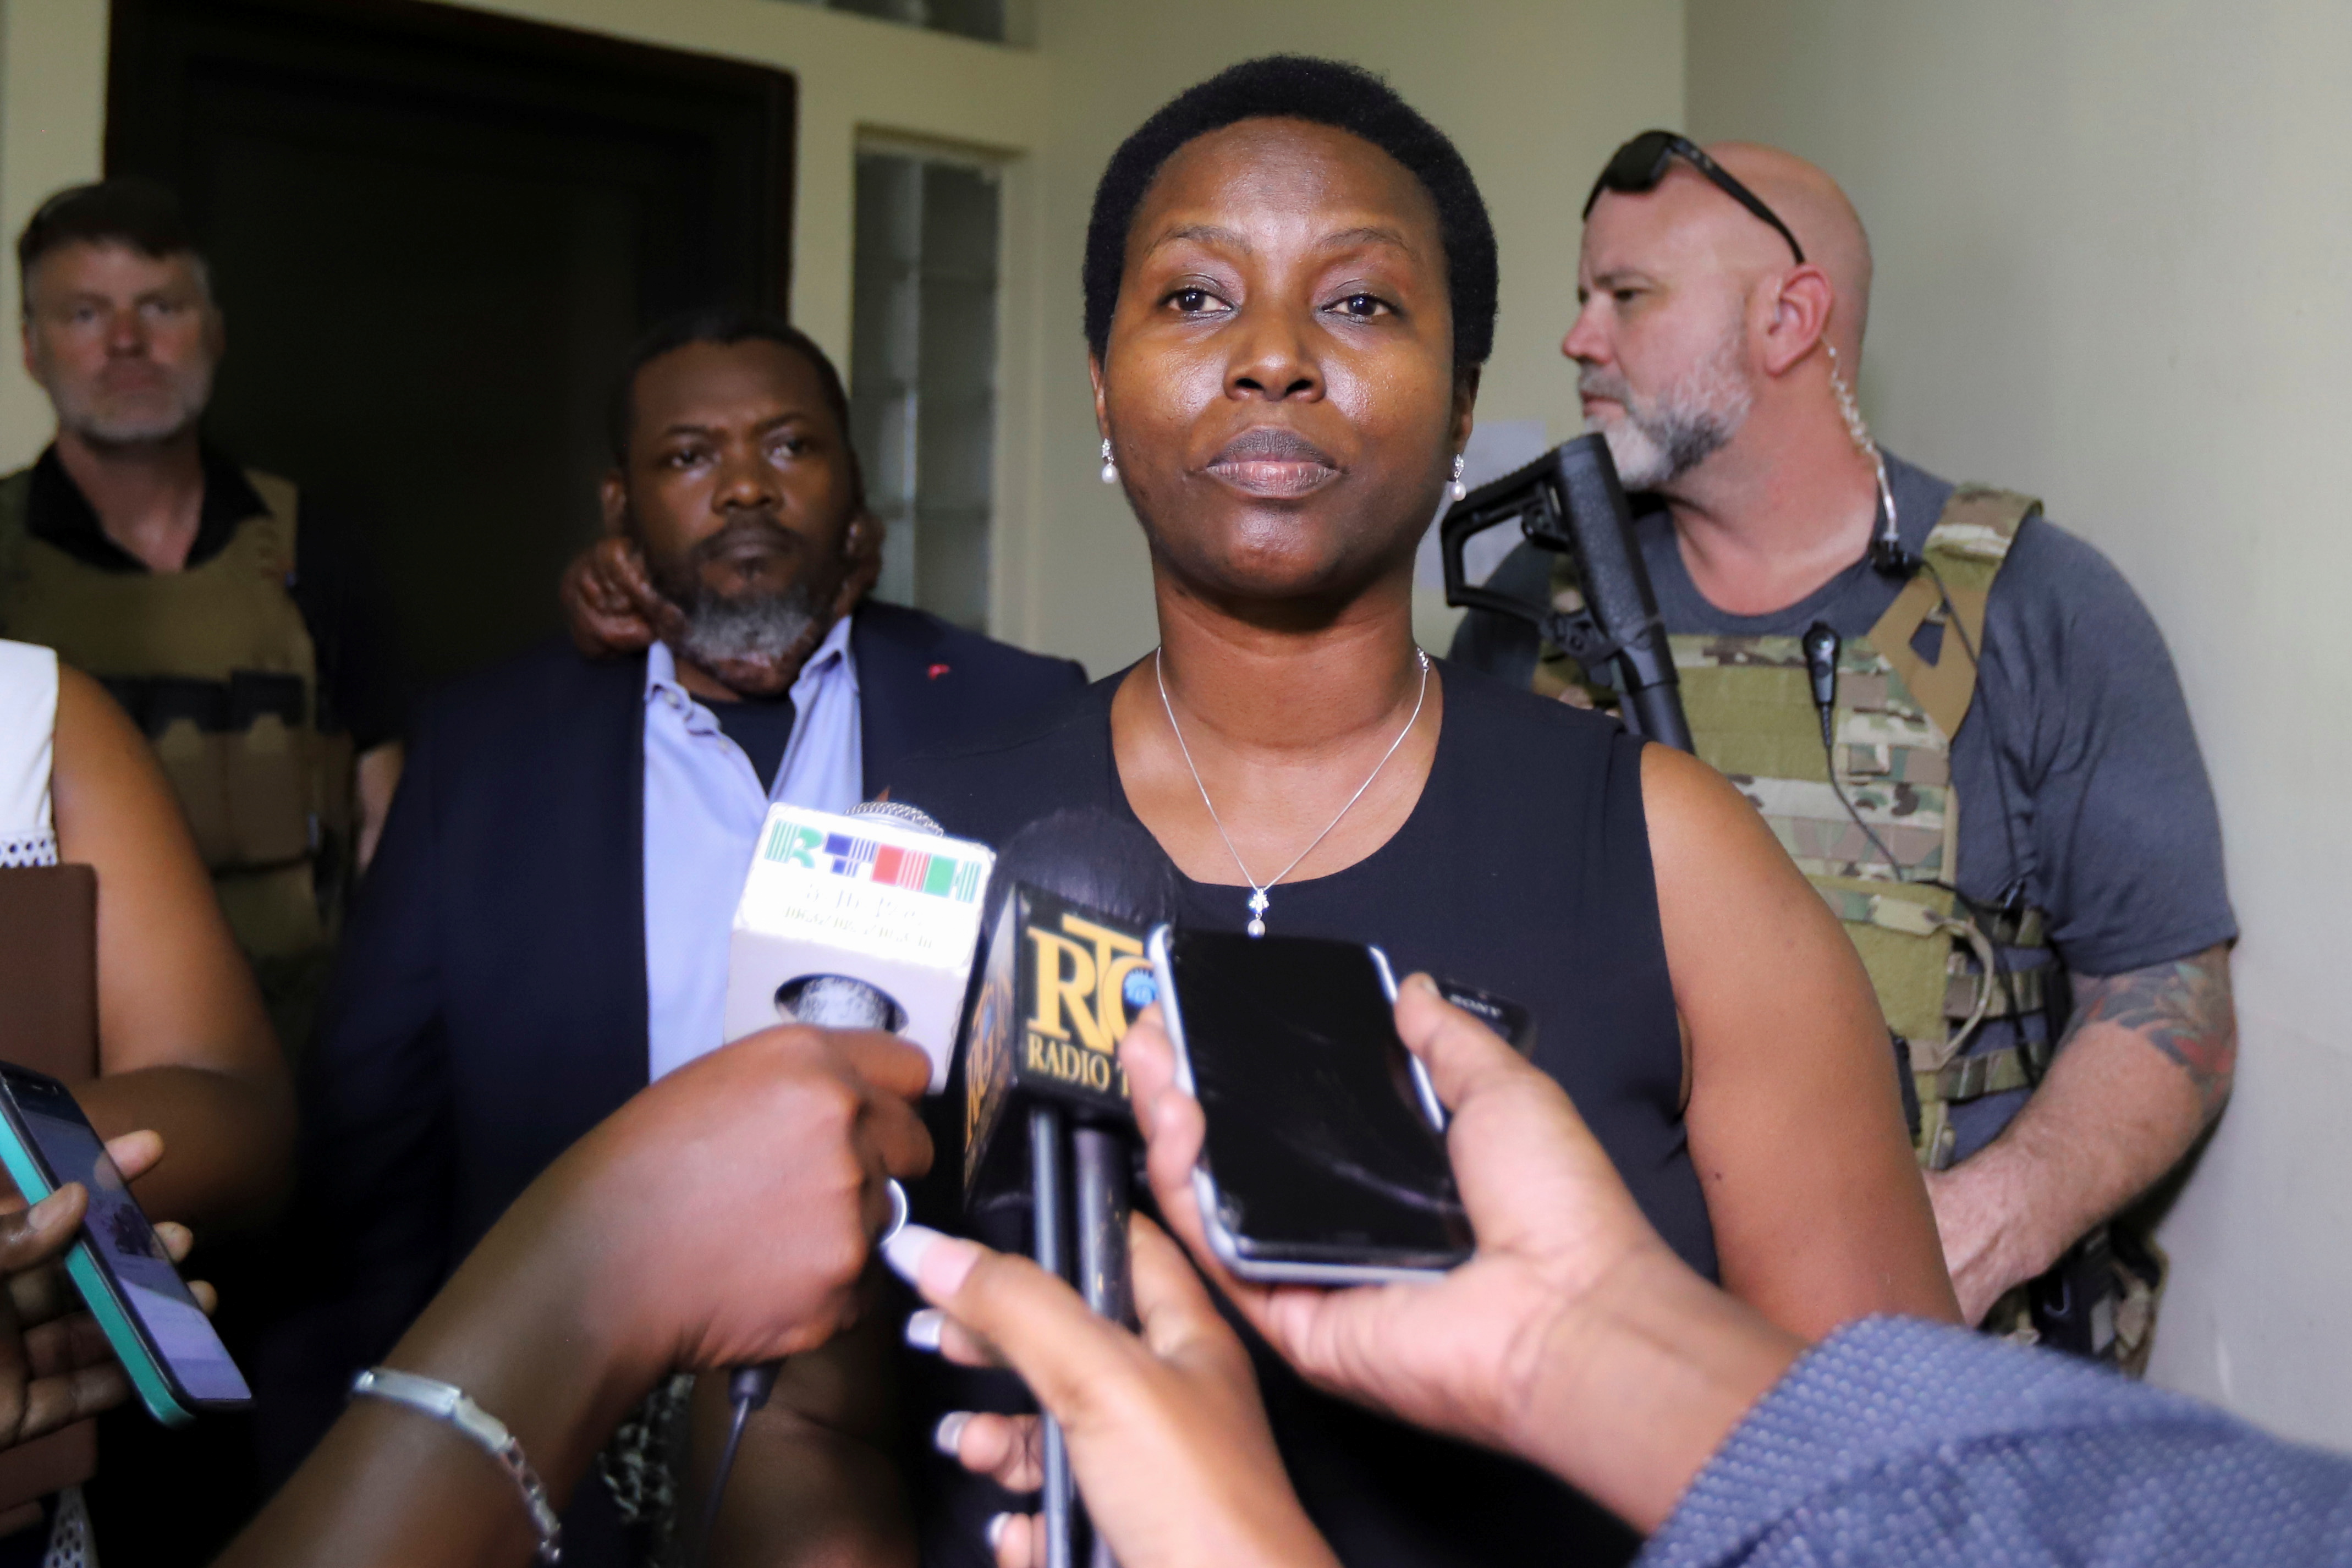 Haiti's former first lady Martine Moise speaks at a judicial hearing into the assassination of her husband President Jovenel Moise, in Port-au-Prince